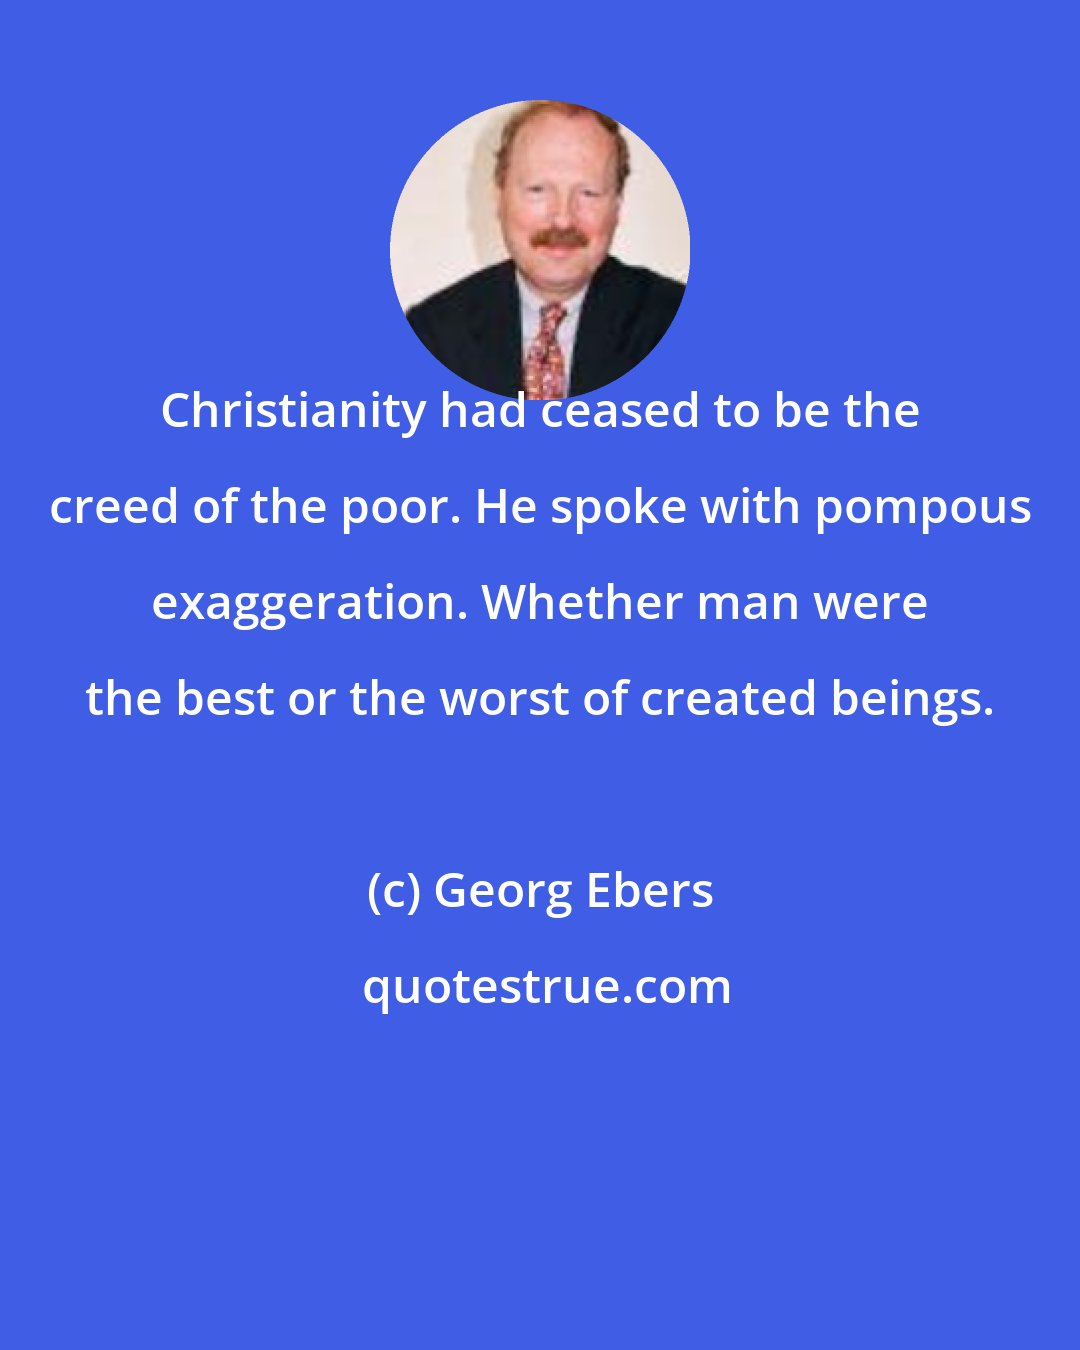 Georg Ebers: Christianity had ceased to be the creed of the poor. He spoke with pompous exaggeration. Whether man were the best or the worst of created beings.